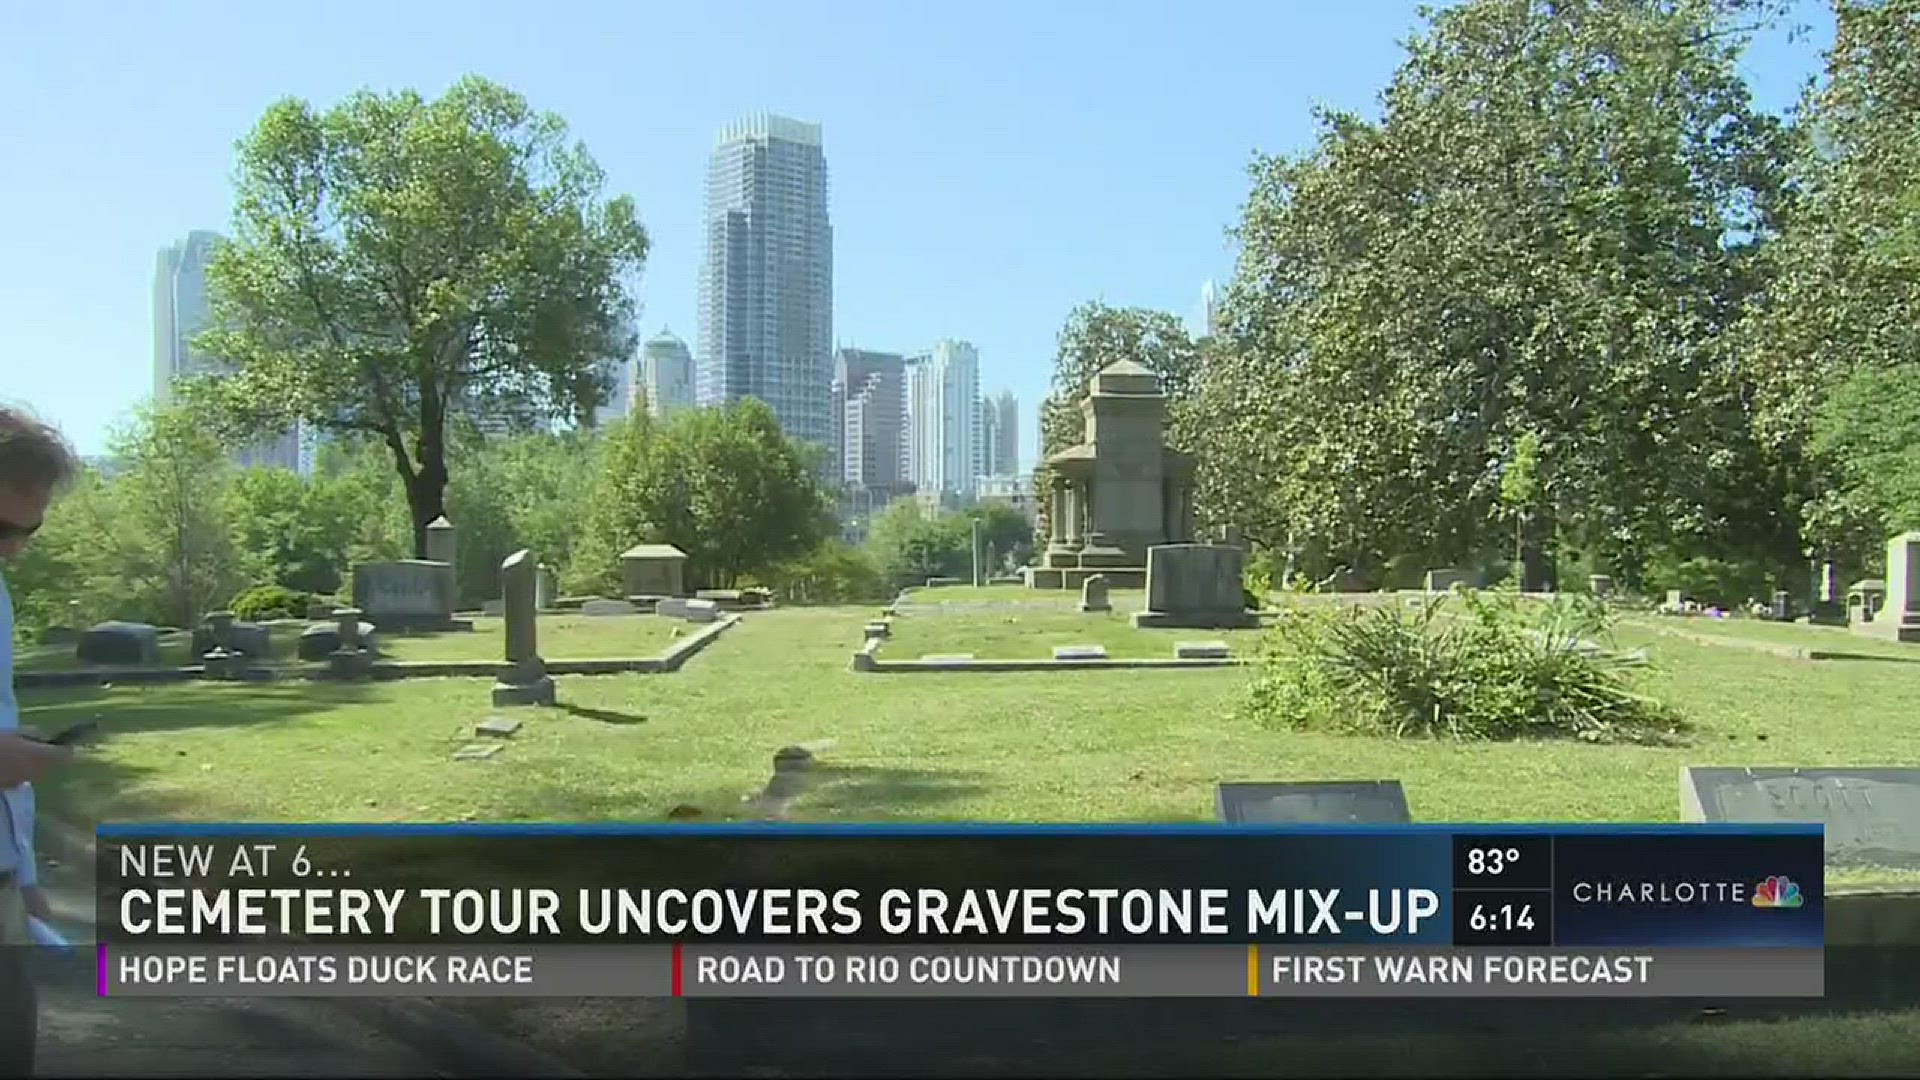 A gravestone mix-up in a Charlotte cemetery has the groundskeeper confused as to the location of two people's remains.